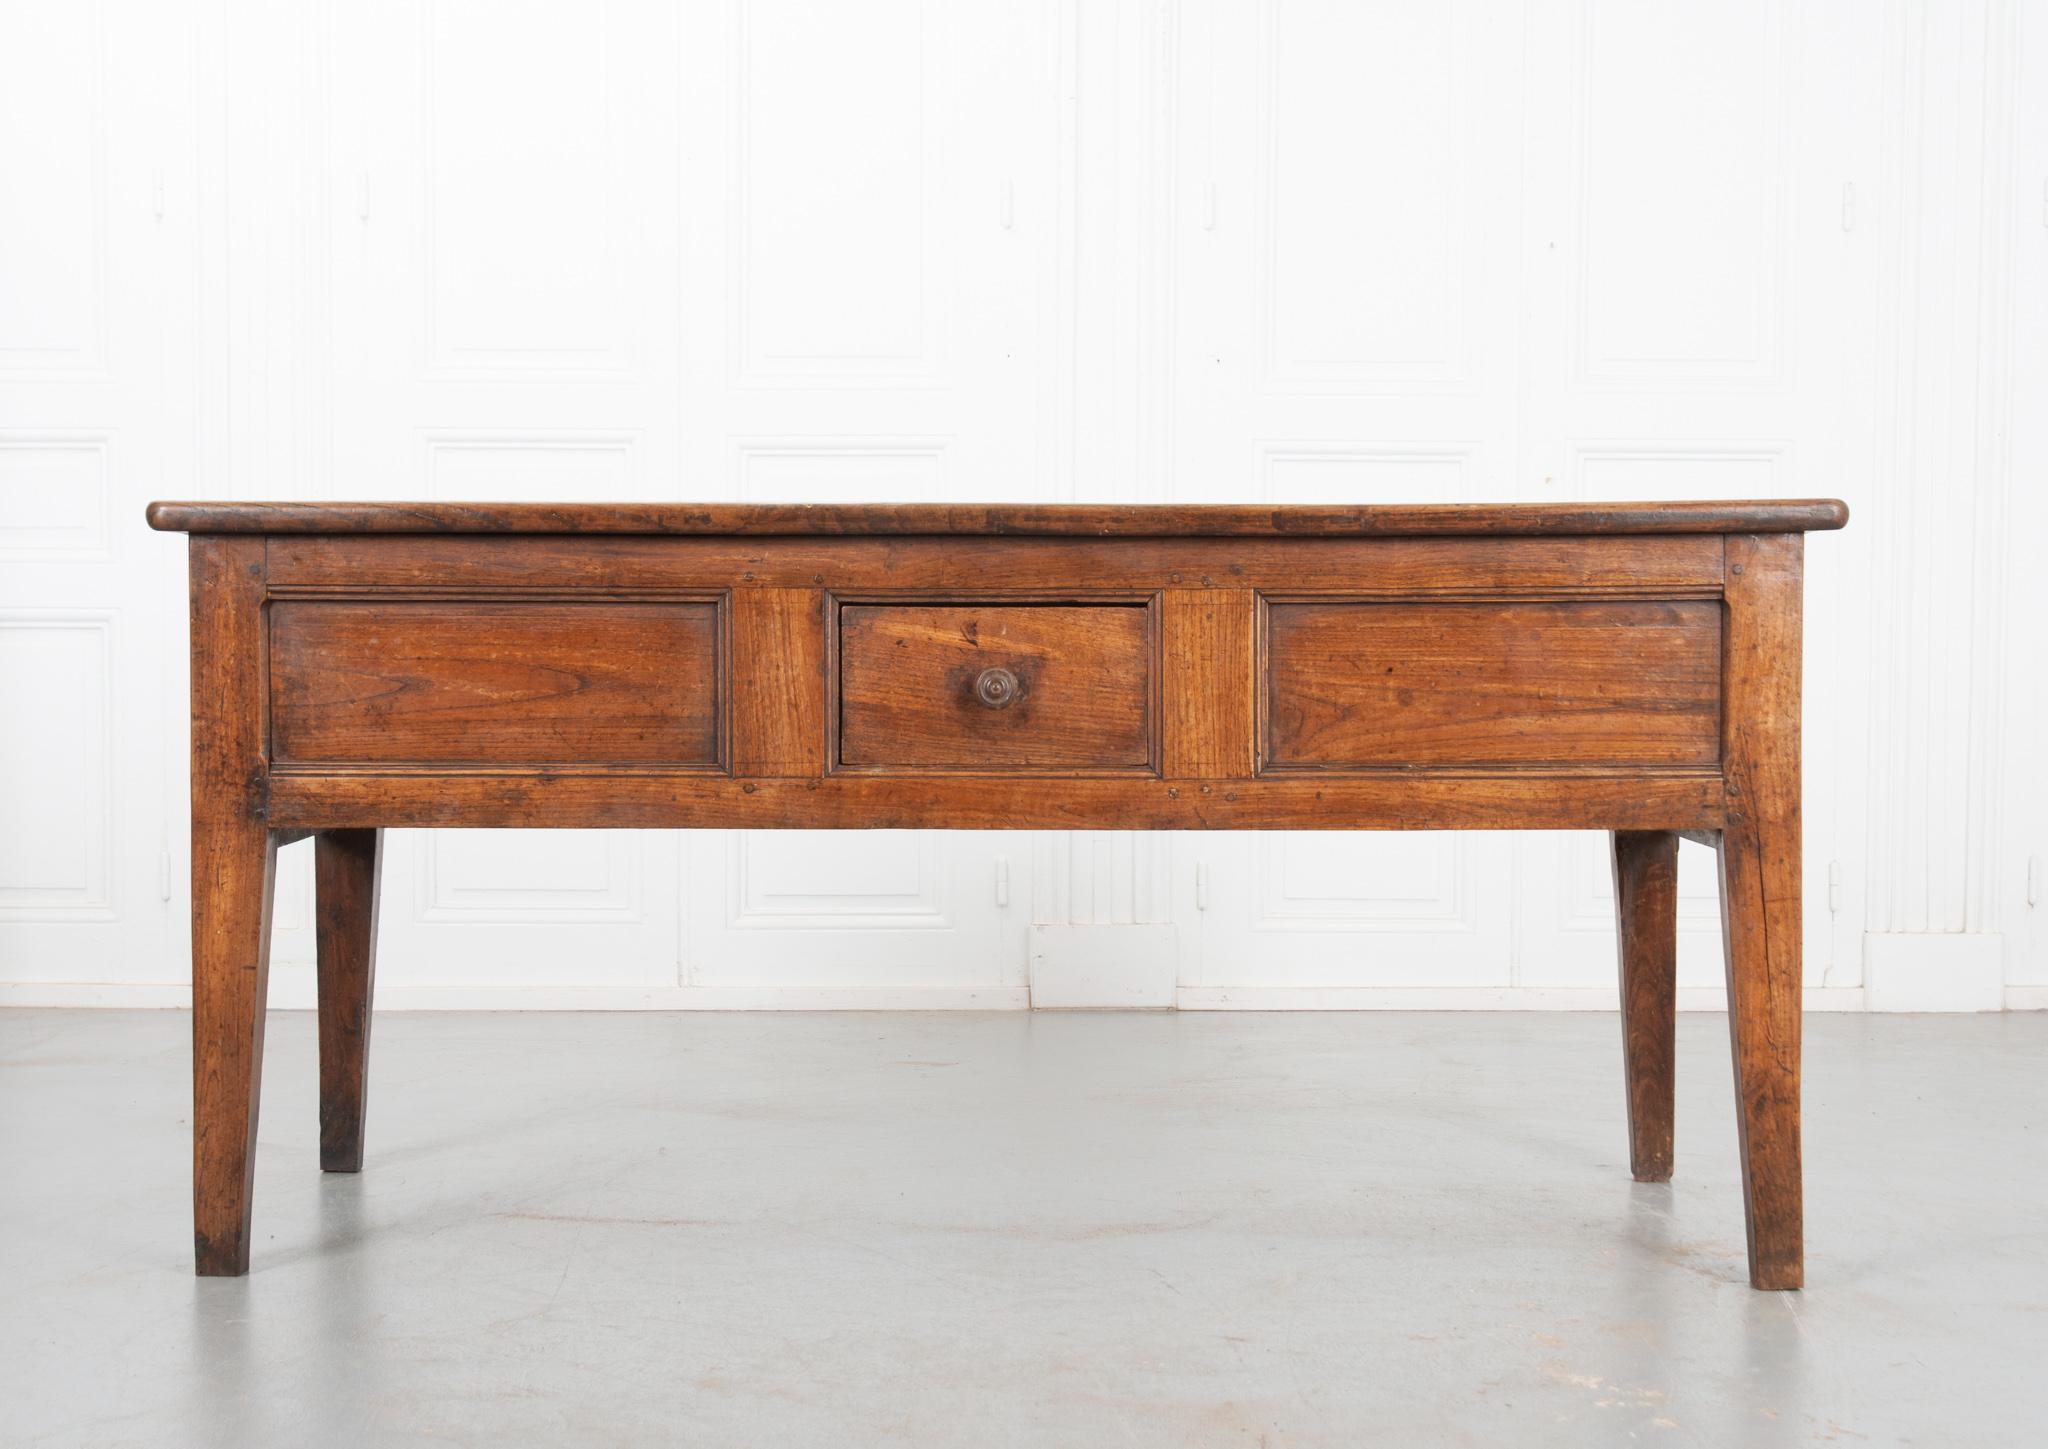 This handsome work table is made of solid walnut and has a great patina. The apron houses a neat set of drawers. A small single drawer with a simple wooden turned knob graces the front. Don’t be fooled though, the sides each house a large drawer for